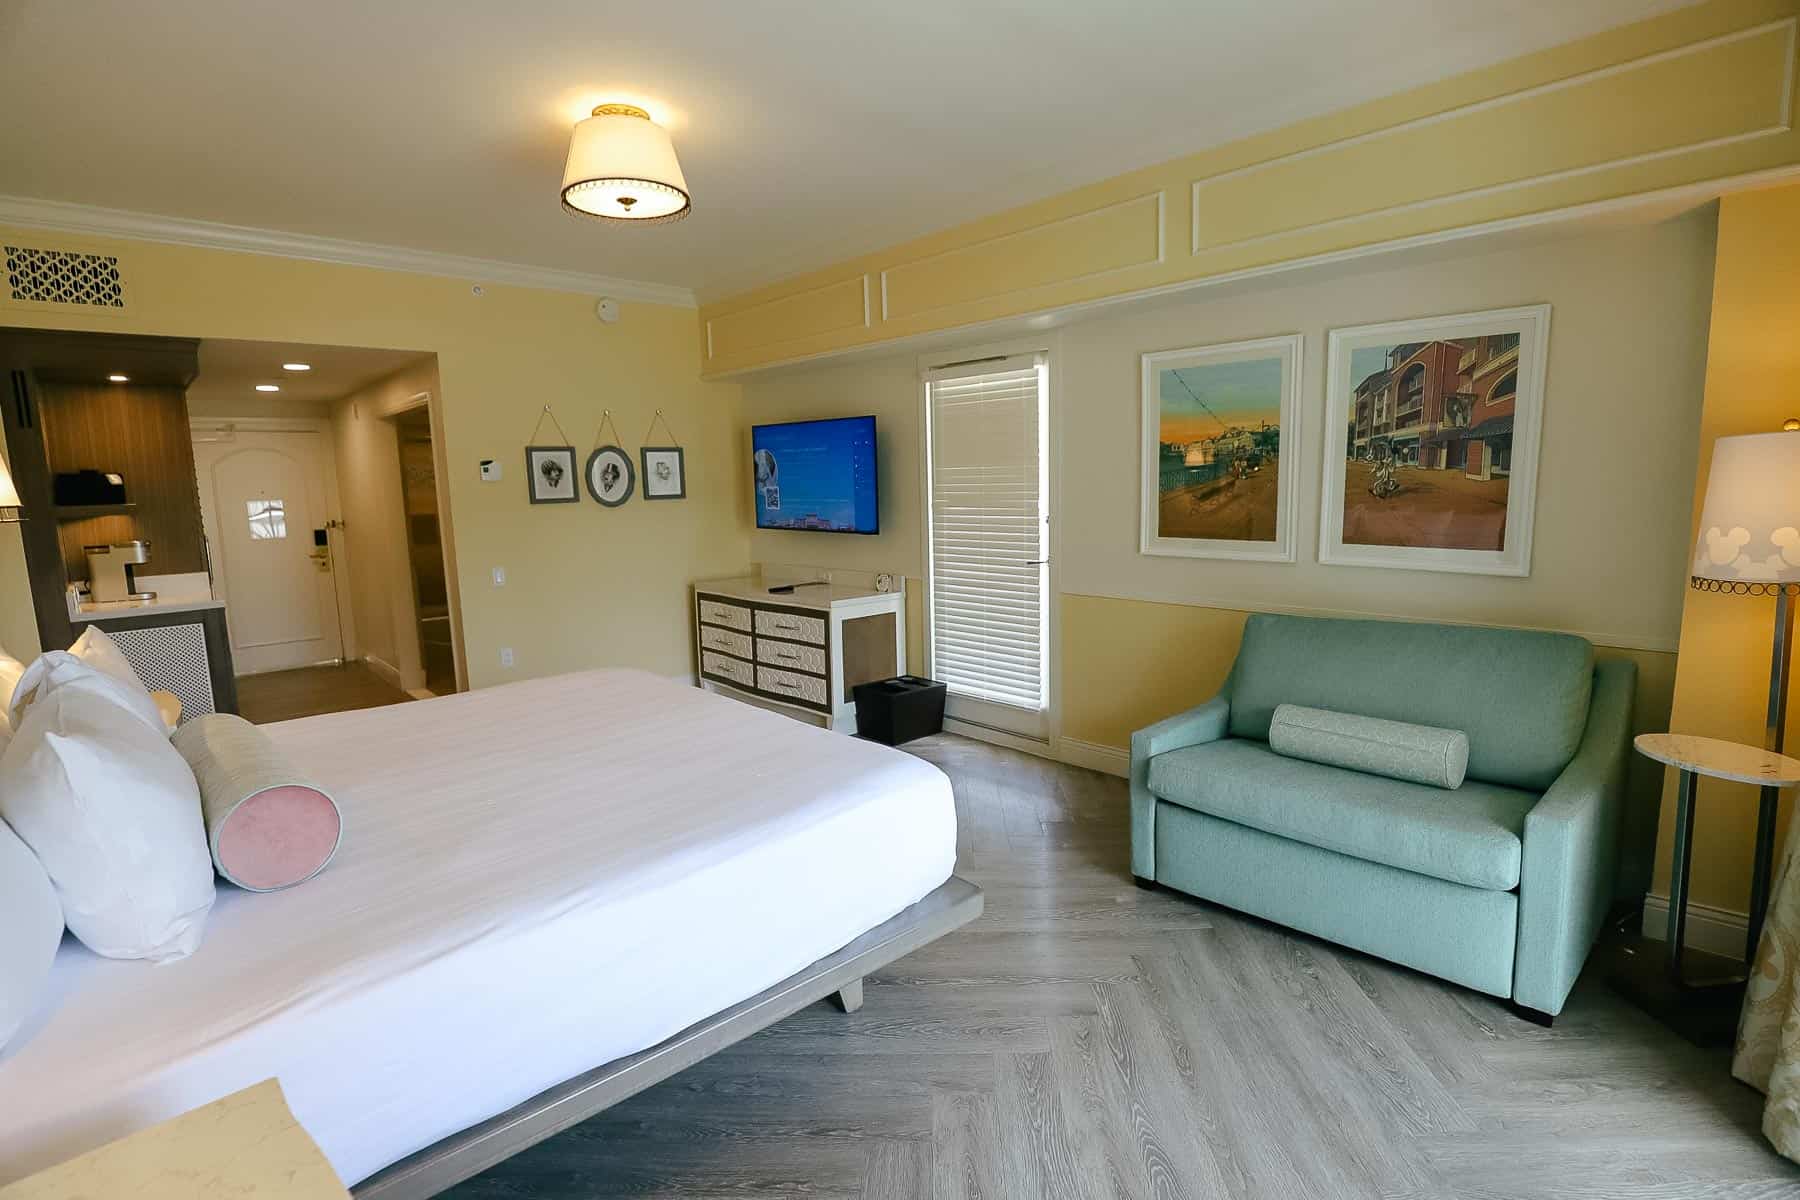 Room with a King Size Bed that was recently refurbished at Disney's Boardwalk Inn. 